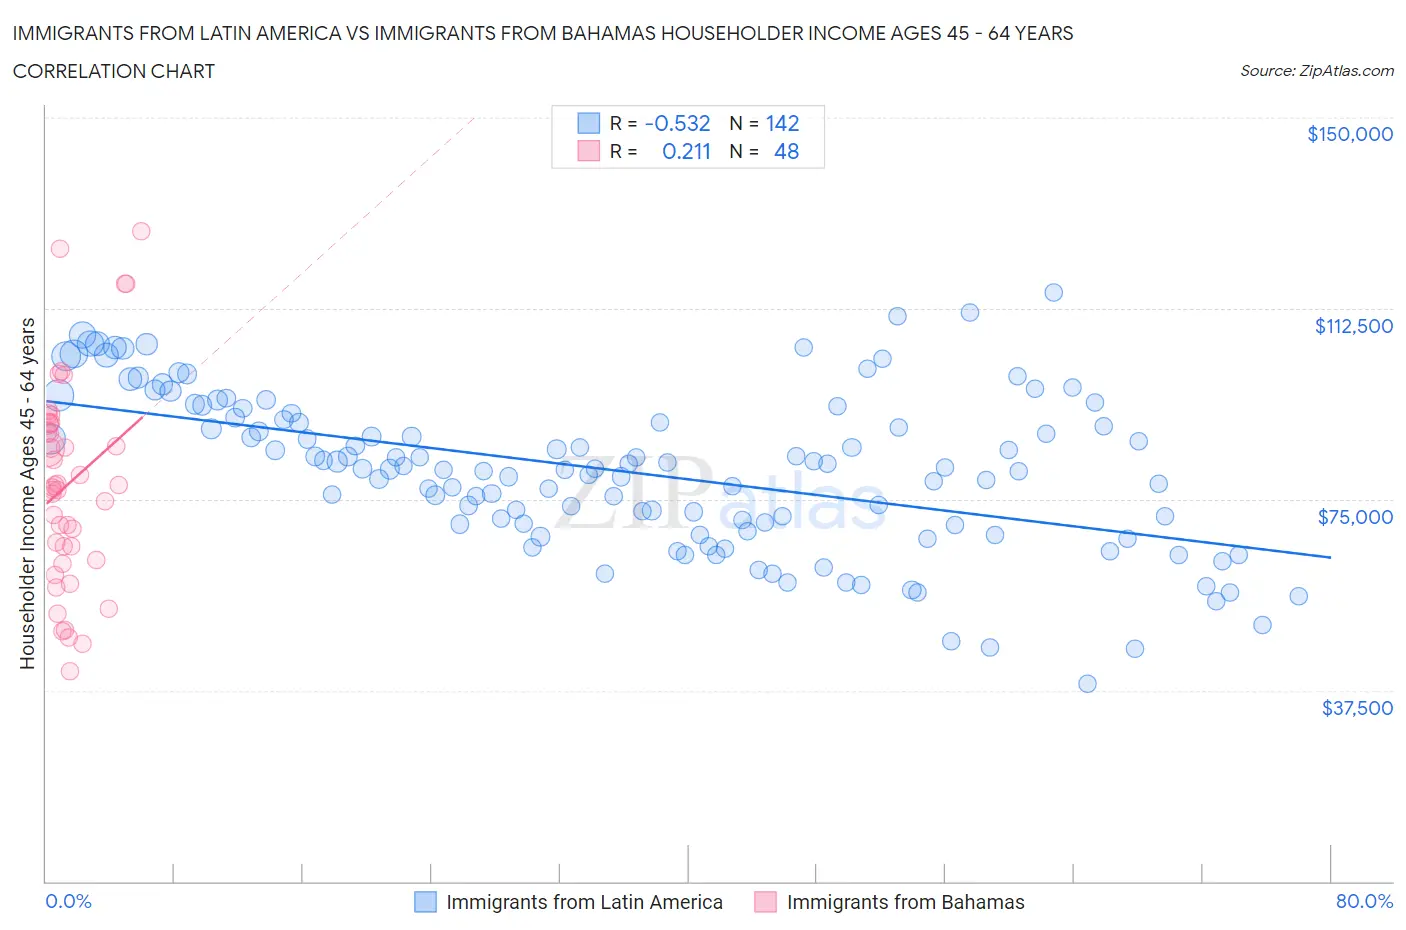 Immigrants from Latin America vs Immigrants from Bahamas Householder Income Ages 45 - 64 years